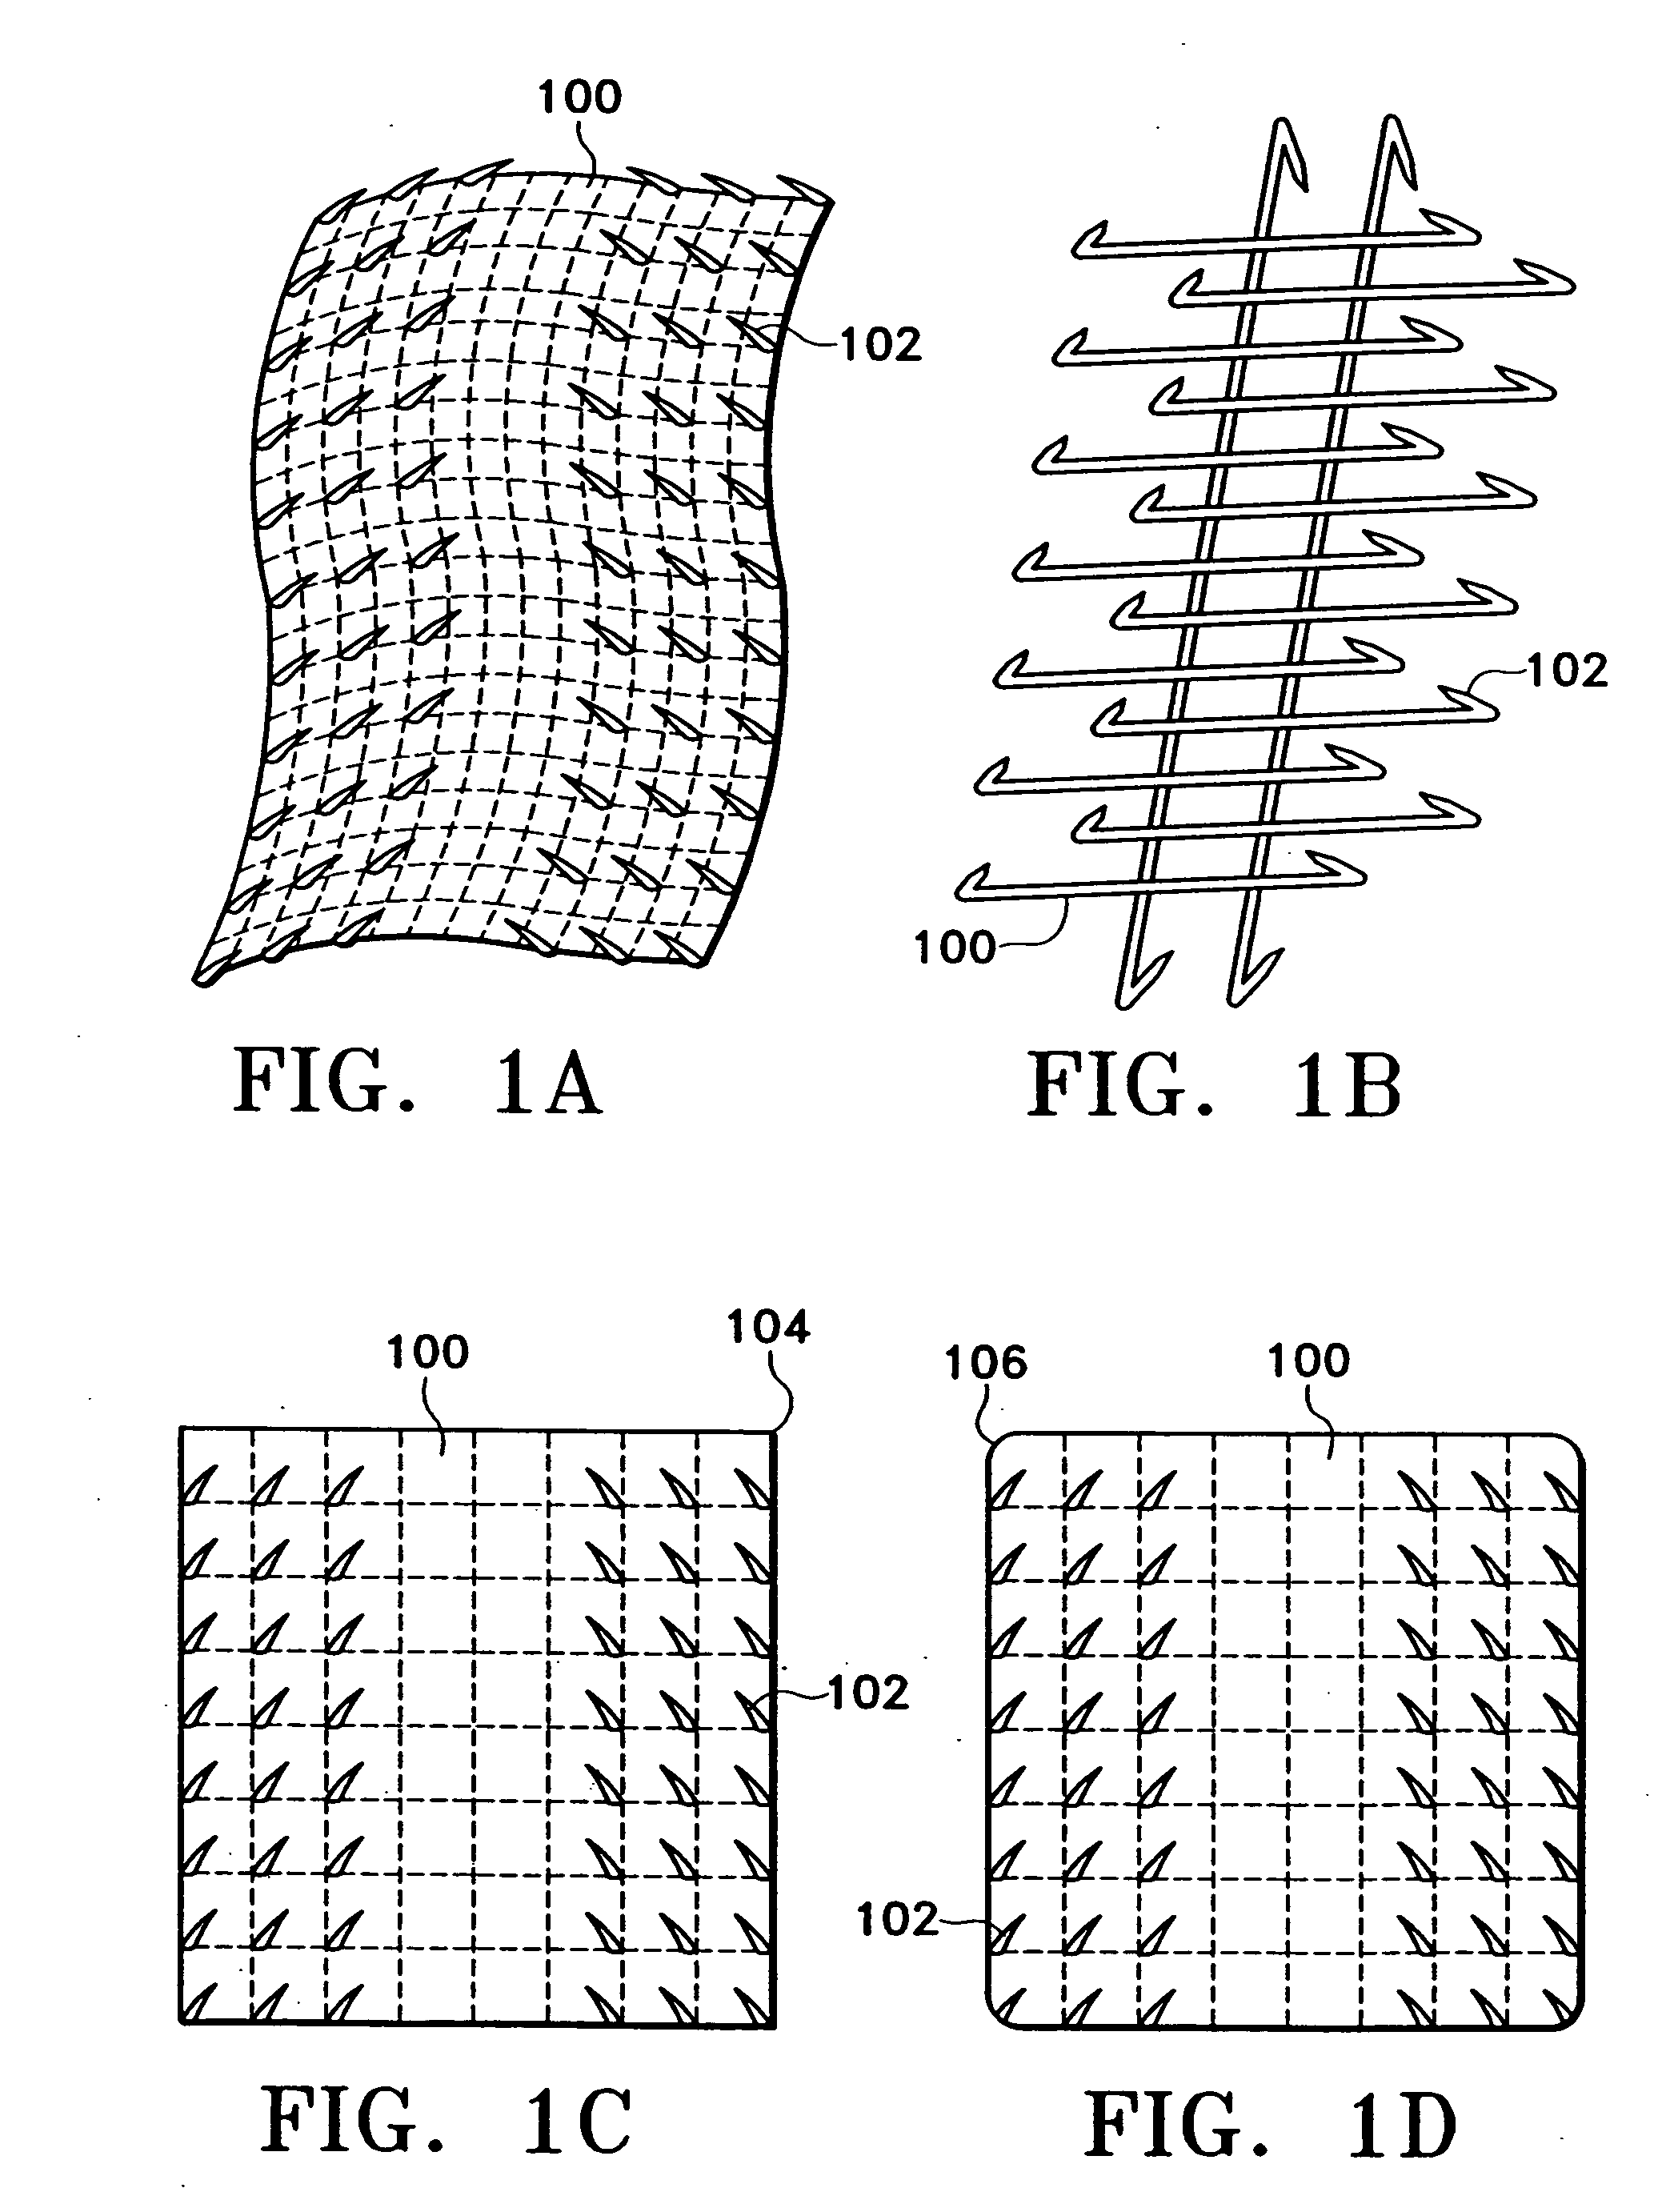 Remotely anchored tissue fixation device and method